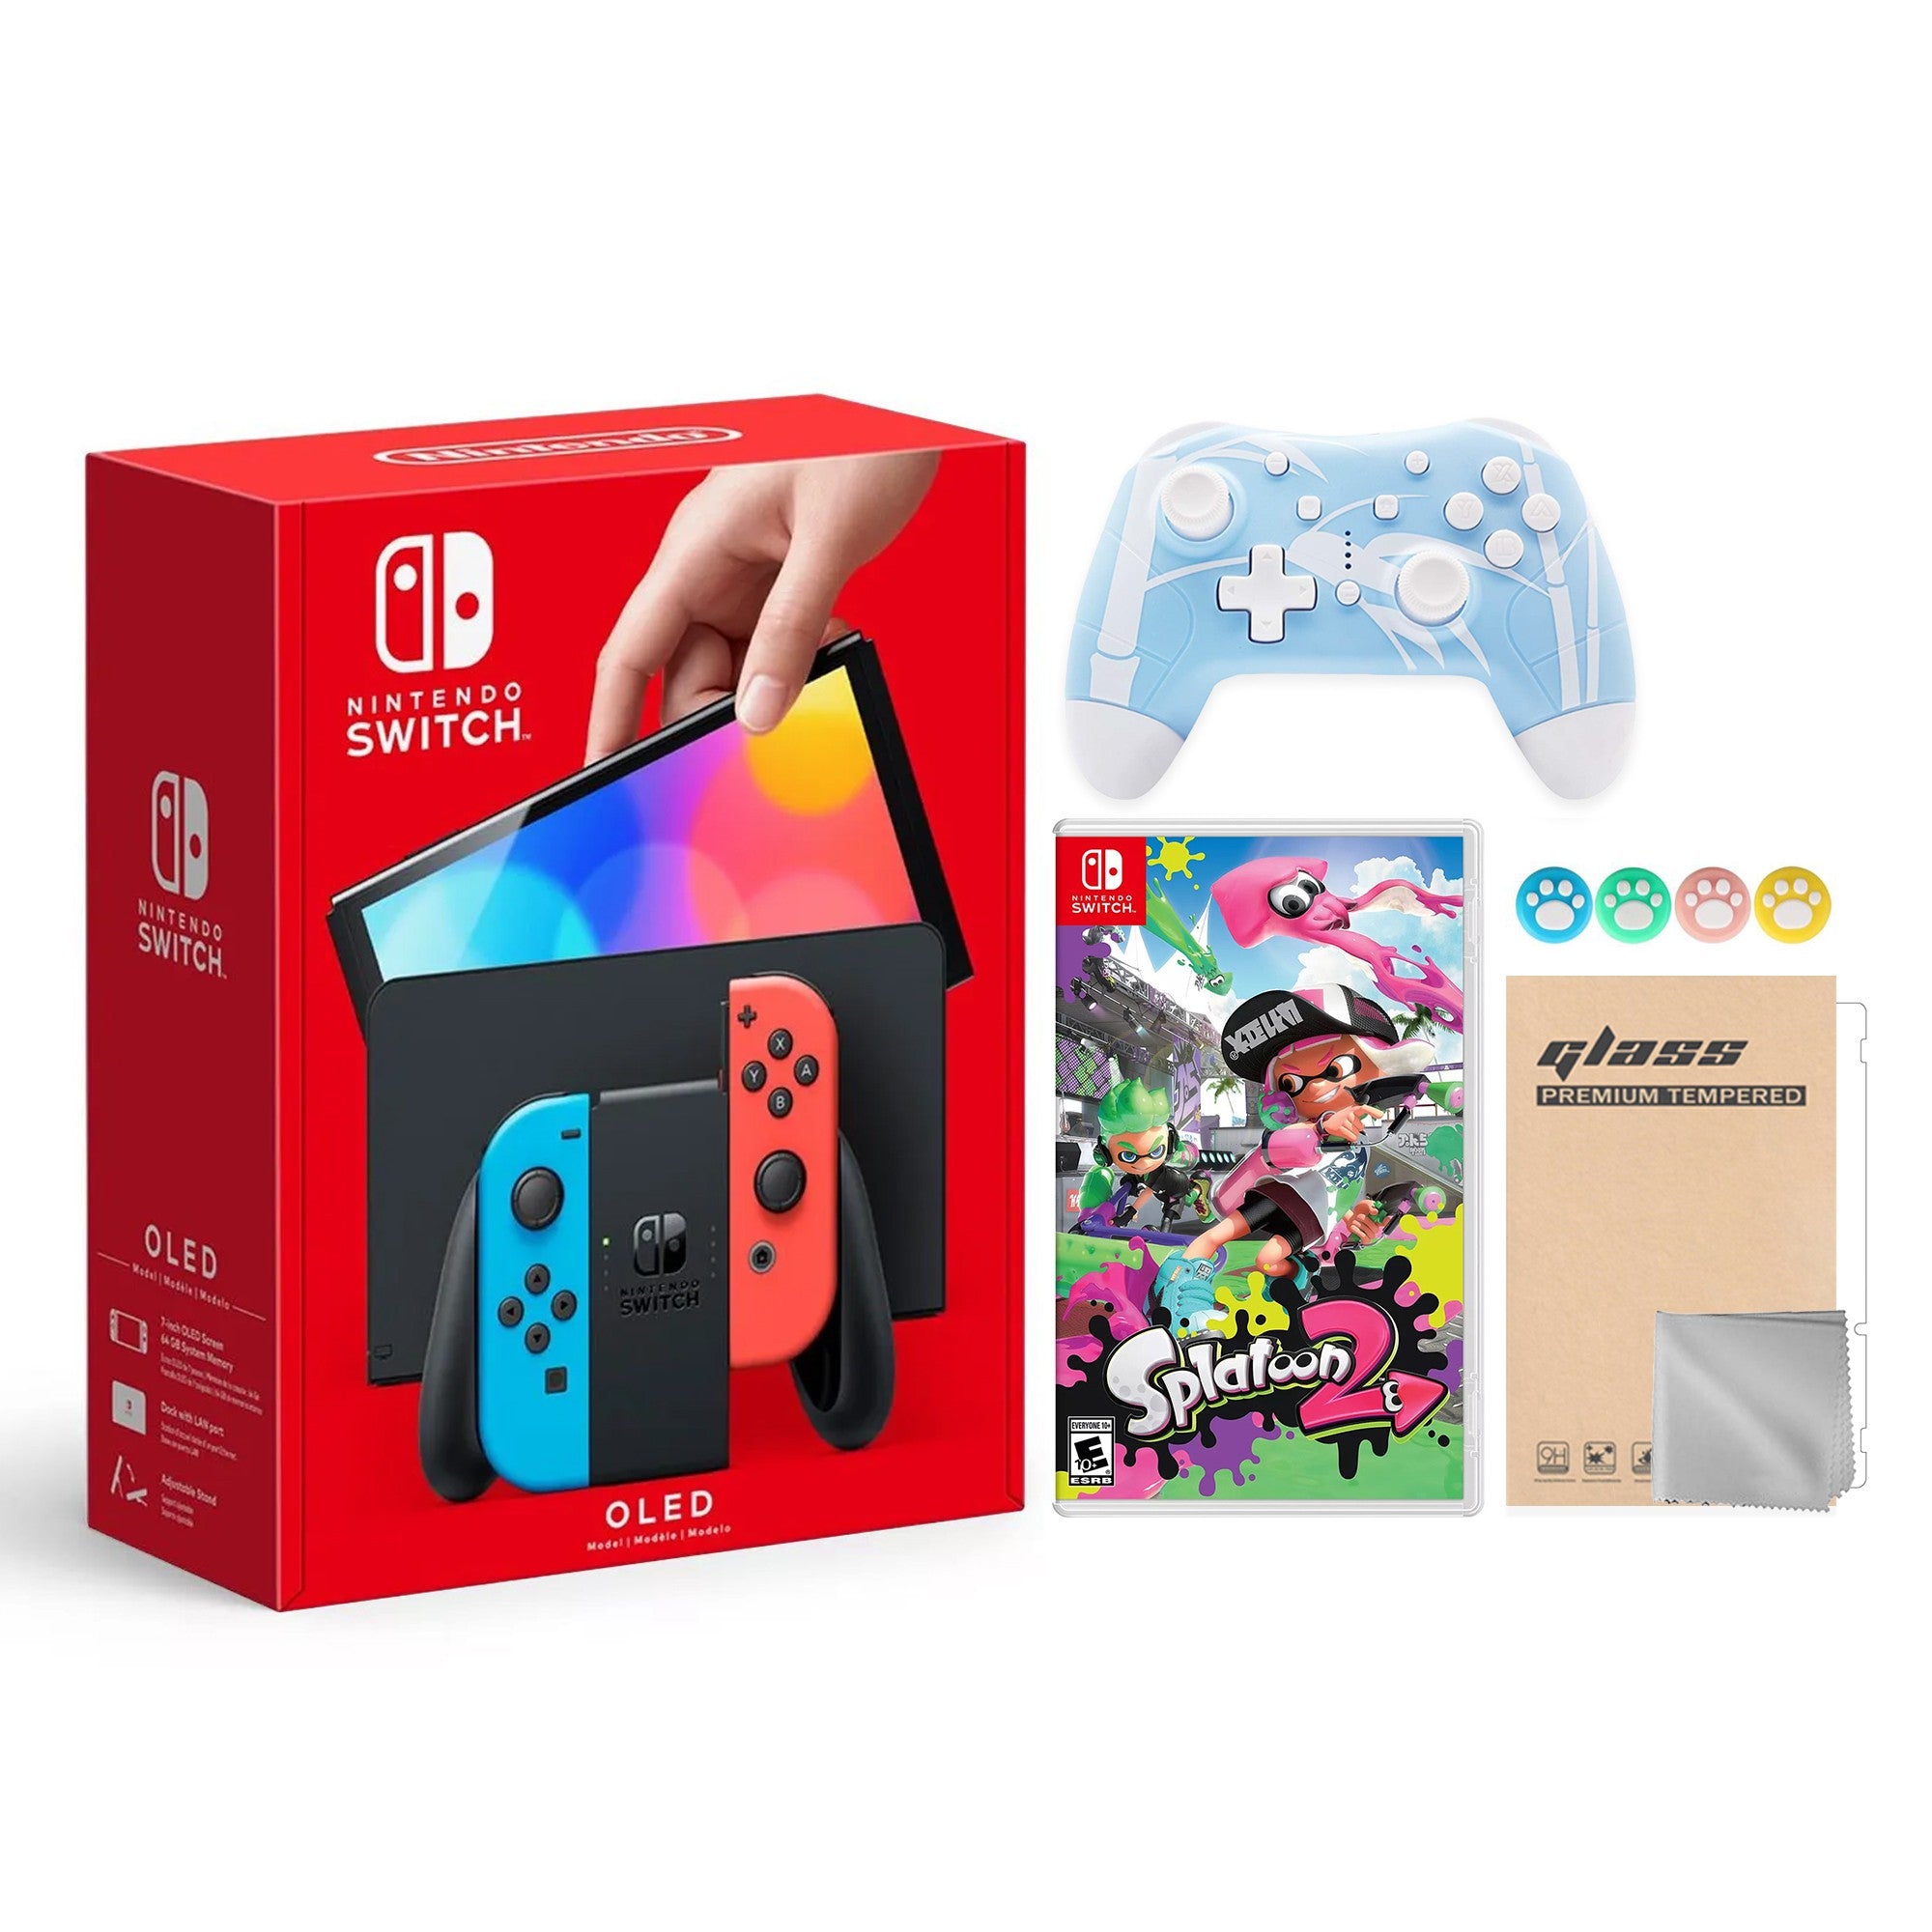 2022 New Nintendo Switch OLED Model Neon Red & Blue Joy Con 64GB Console HD Screen & LAN-Port Dock with Splatoon 2, Mytrix Wireless Switch Pro Controller and Accessories